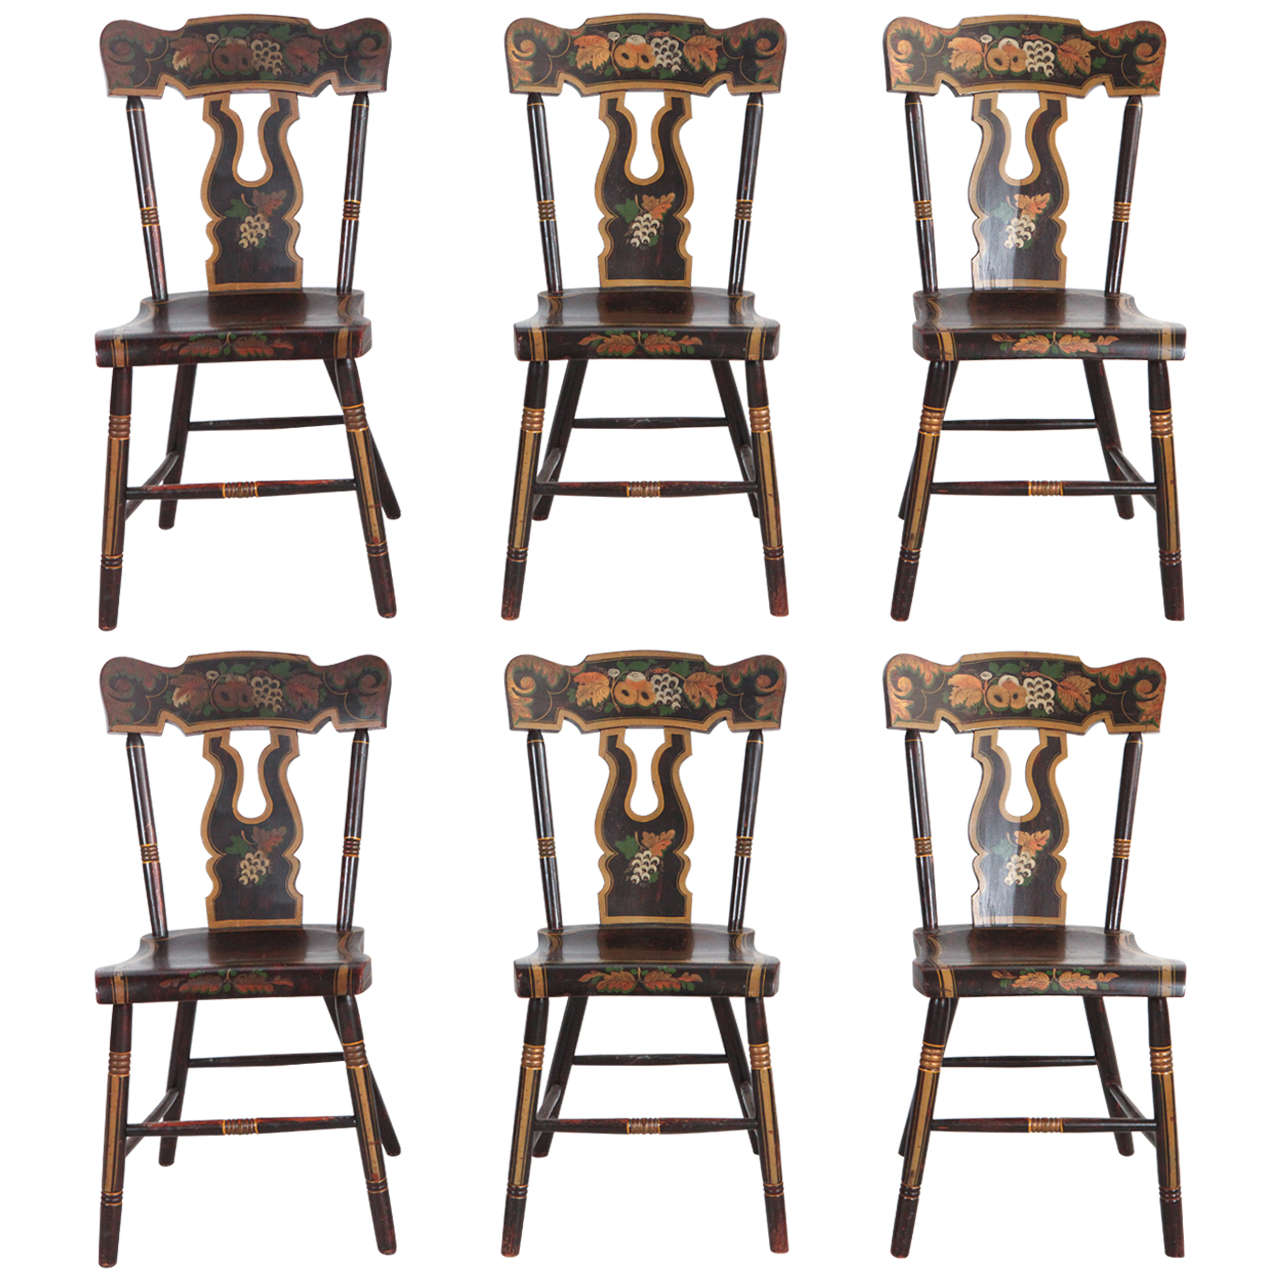 Four French Hand Painted Chairs, Sold Individually